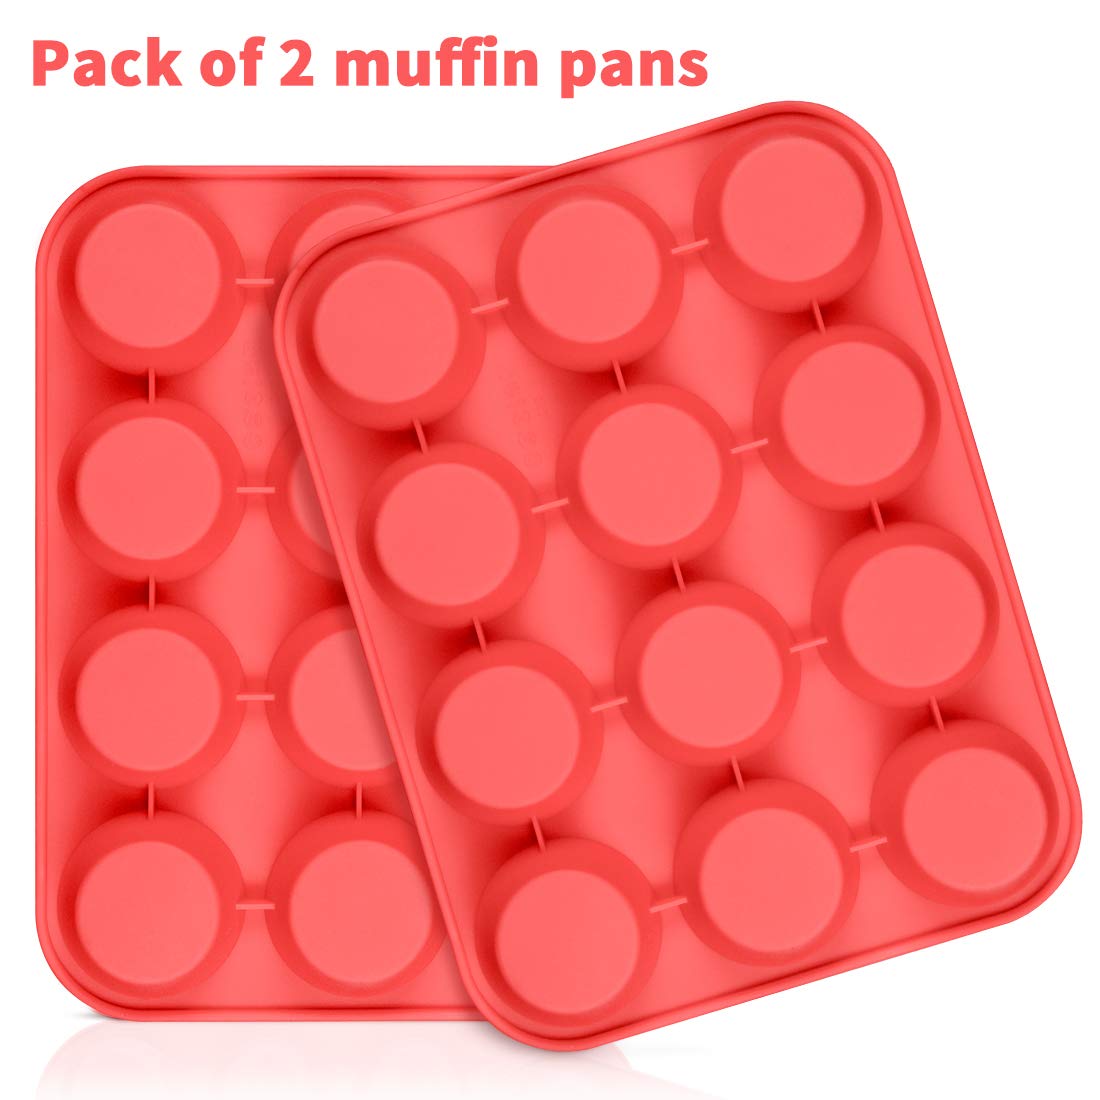 FUNBAKY Silicone Muffin Pan, European LFGB 12 Cups Cupcake Pan, 2-Pack Muffin Tin for Muffin, Cupcake, Fat Bomb, Egg Muffin, 100% Food Grade Silicone Molds